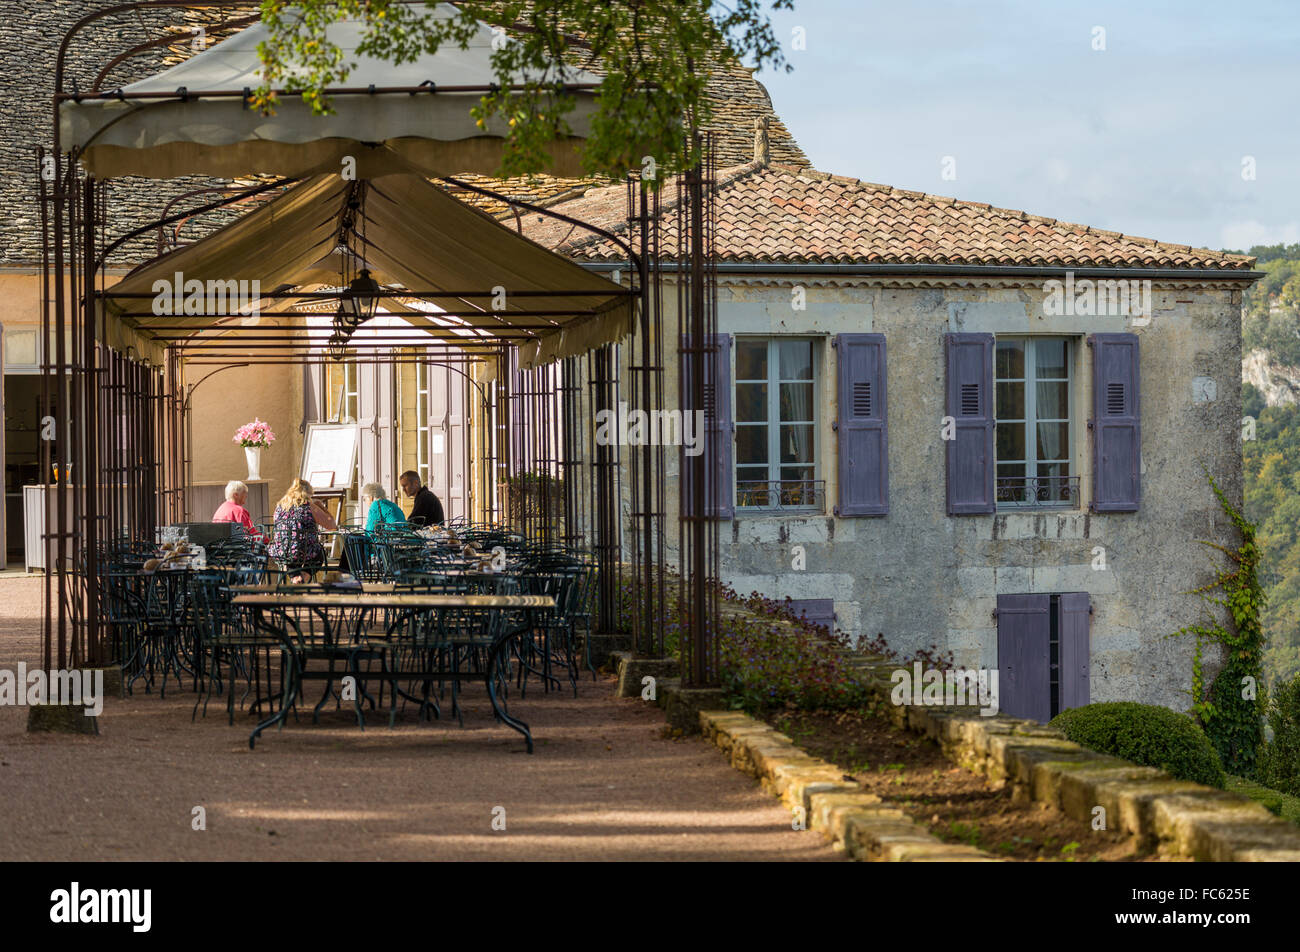 Outdoor cafe at the chateau de Marqueyssac, Dordogne, France Stock Photo